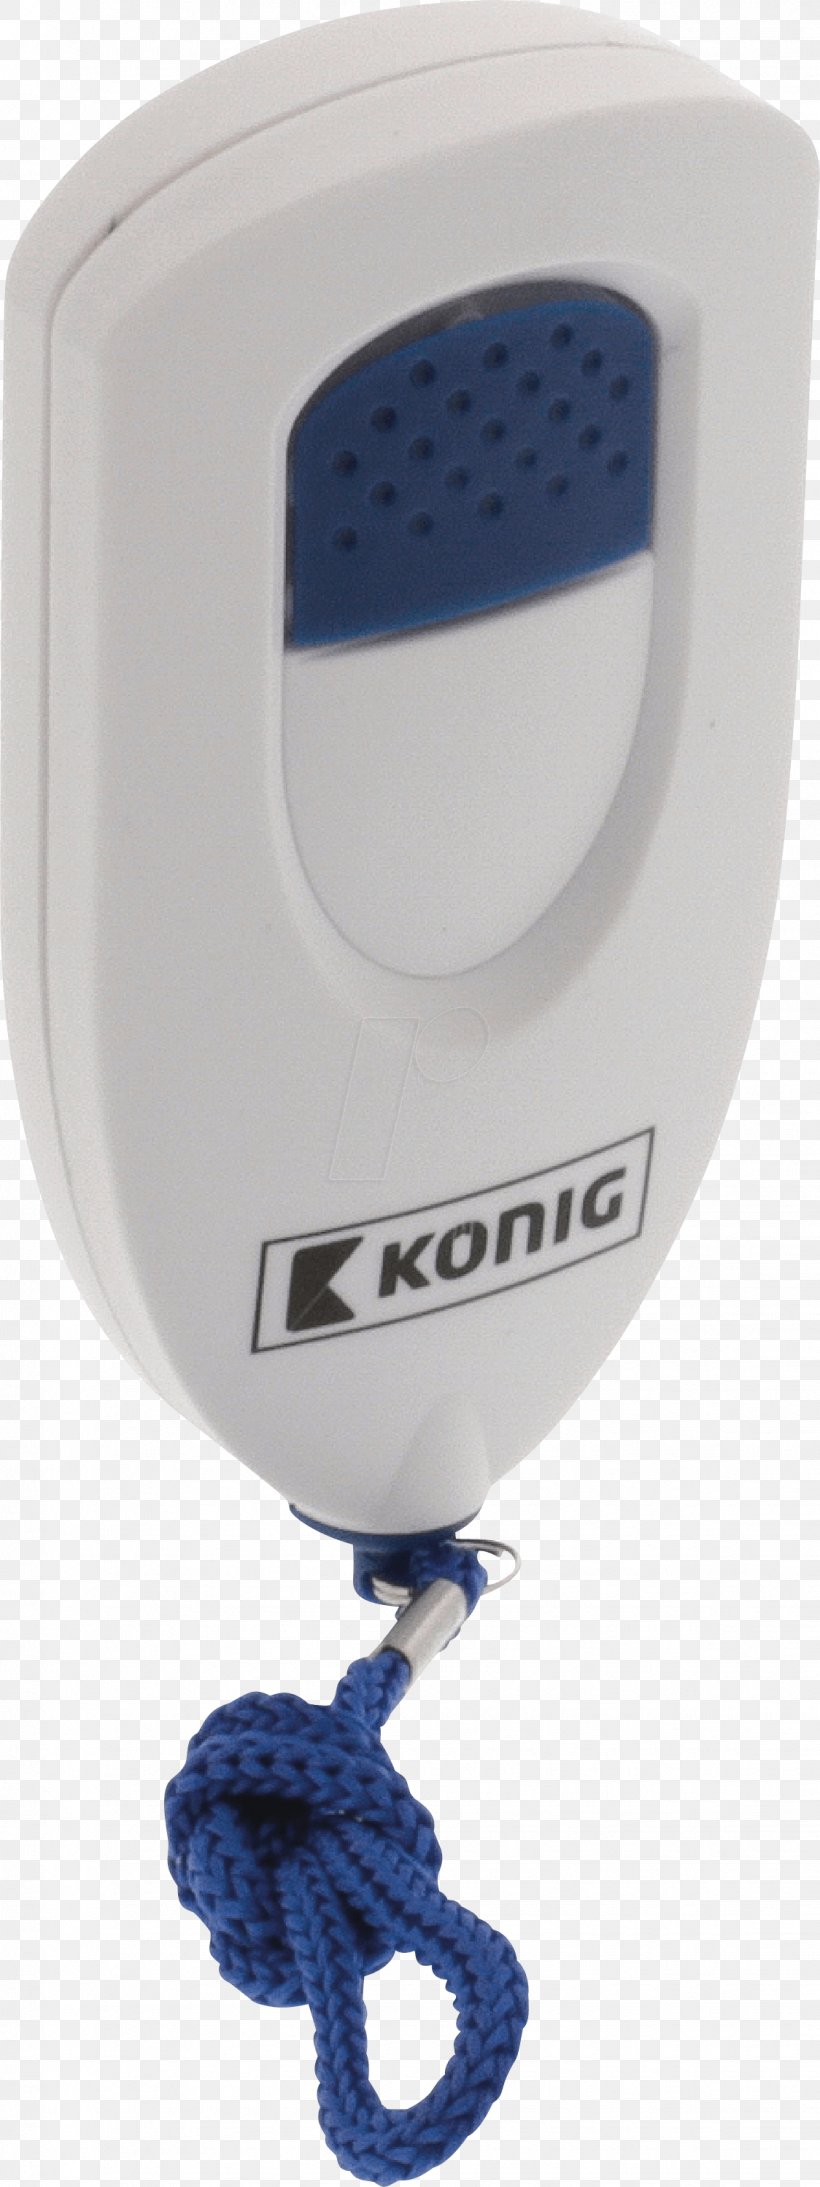 Security Alarms & Systems Alarm Device Siren King Industrial Design, PNG, 1124x2999px, Security Alarms Systems, Alarm Device, Computer Hardware, Deutsche Bahn, Greek Download Free